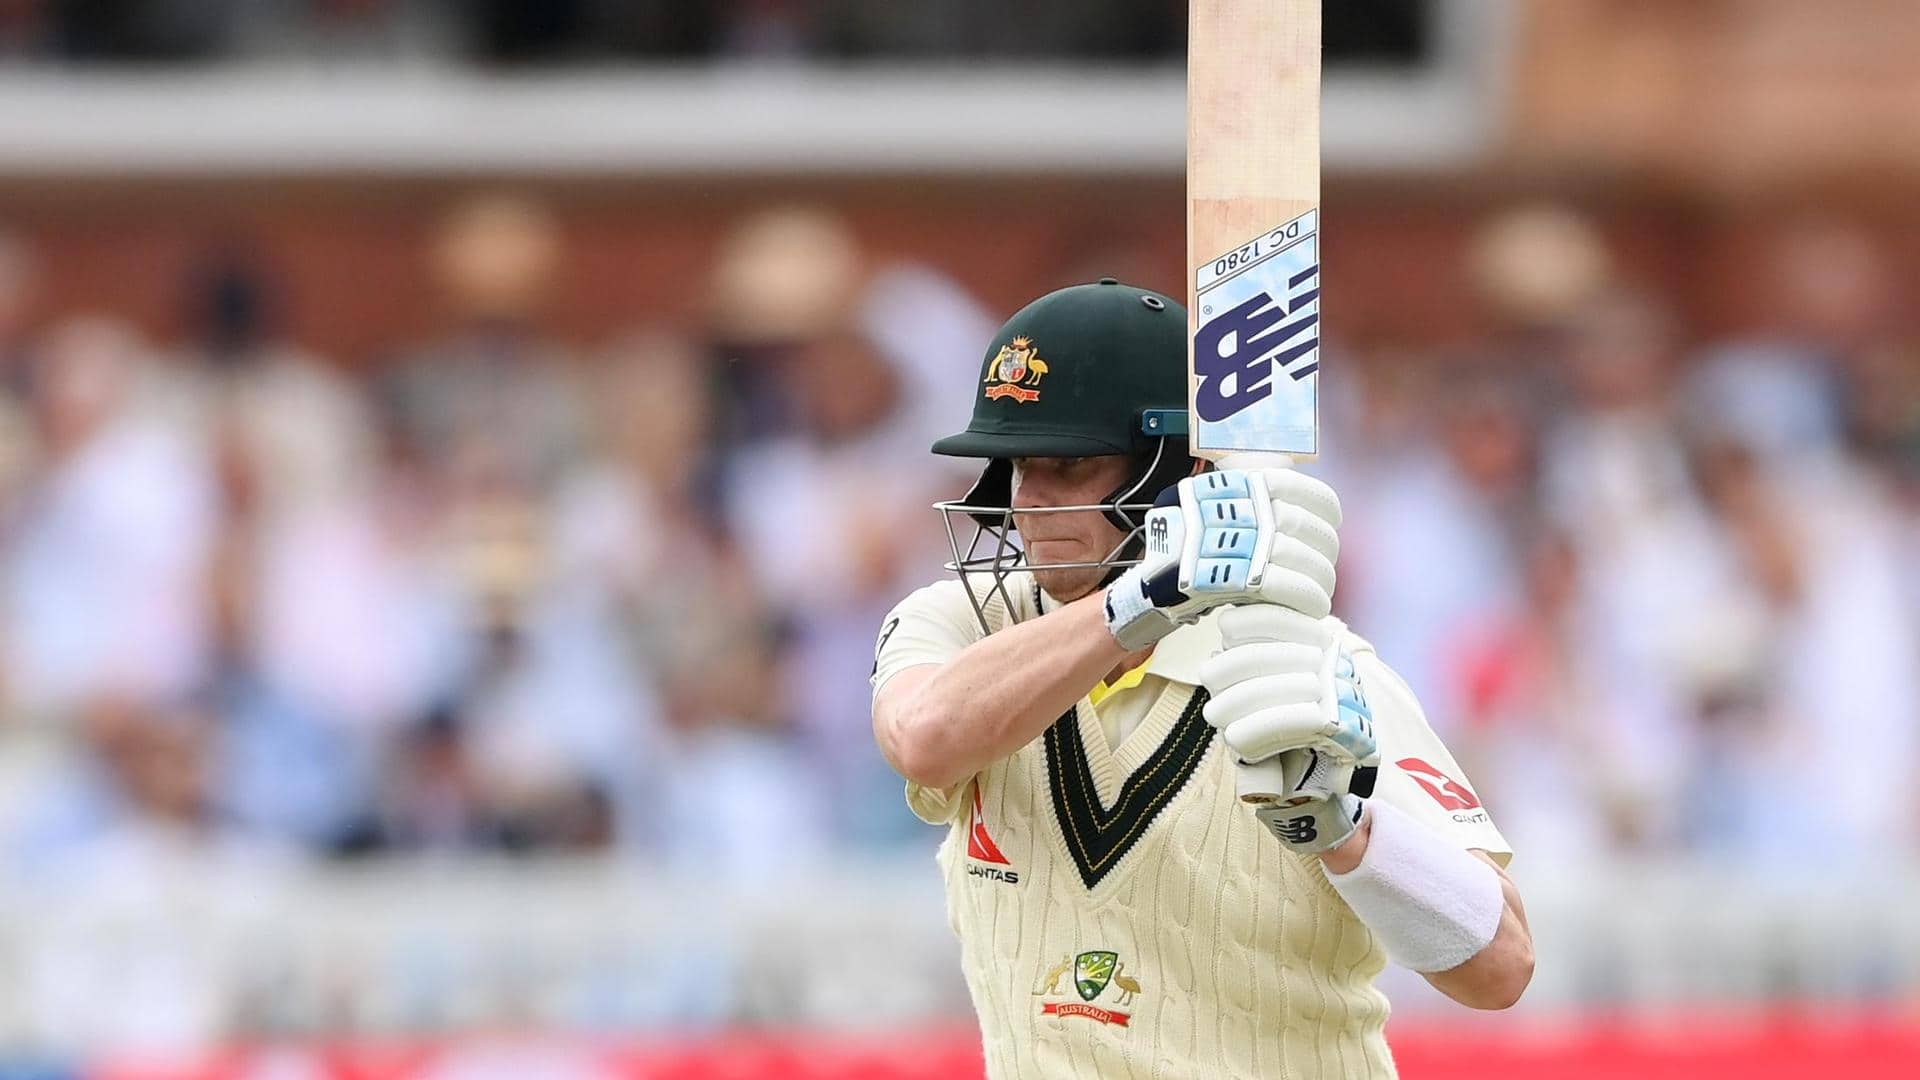 The Ashes: Steve Smith achieves a unique record at Lord's